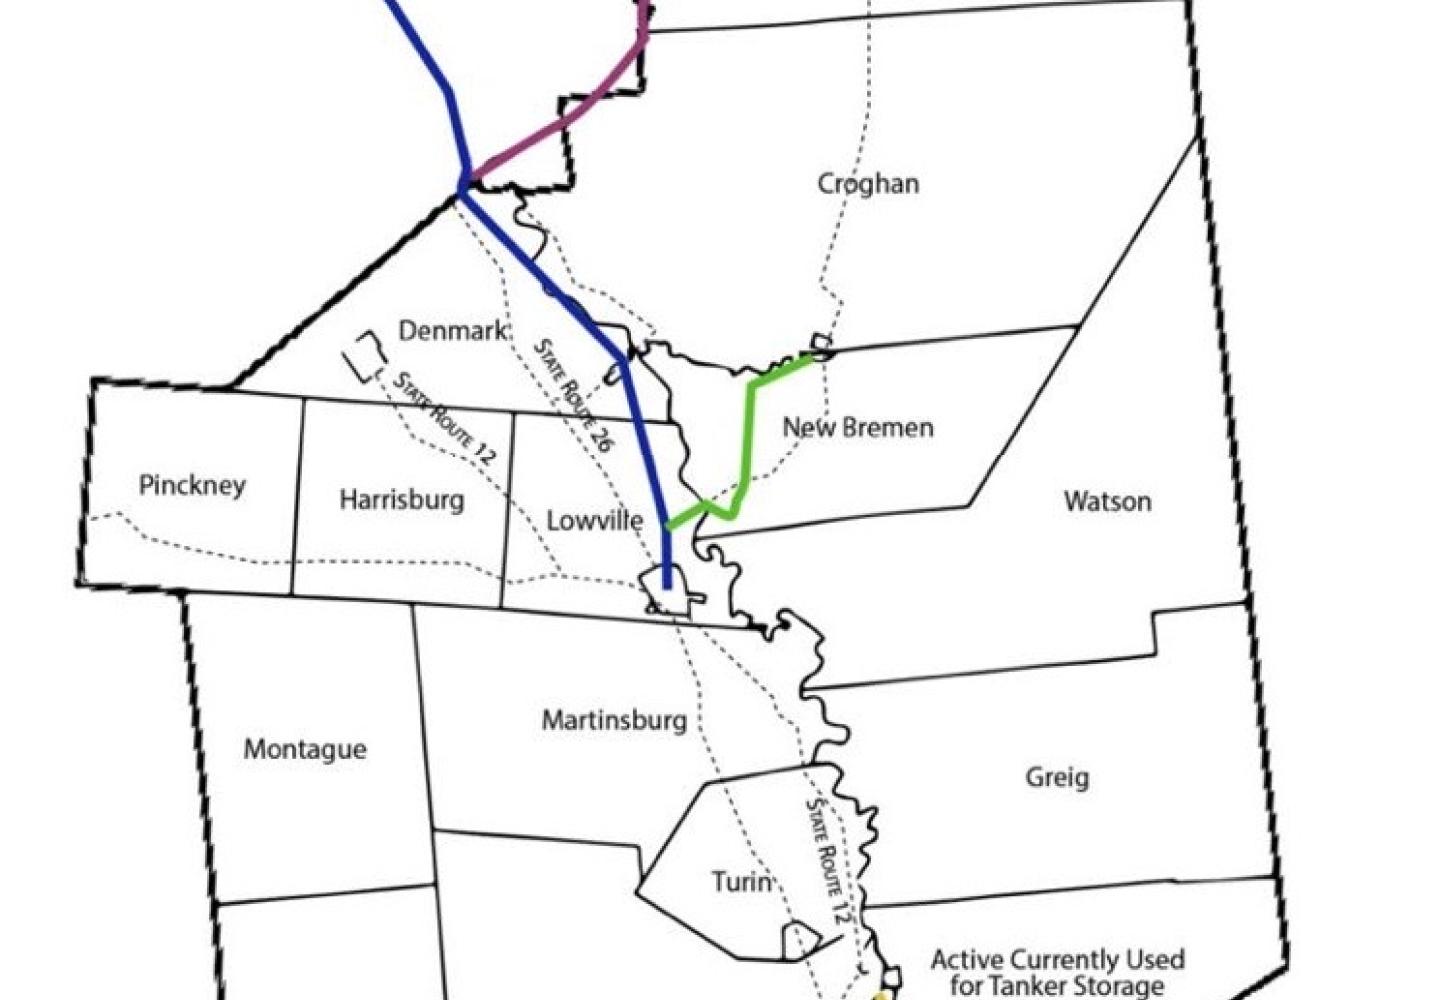 Lewis County wants to convert into multi-use trails the rail lines shown in blue, green and yellow. The rail corridors lie just west of the Adirondack Park.